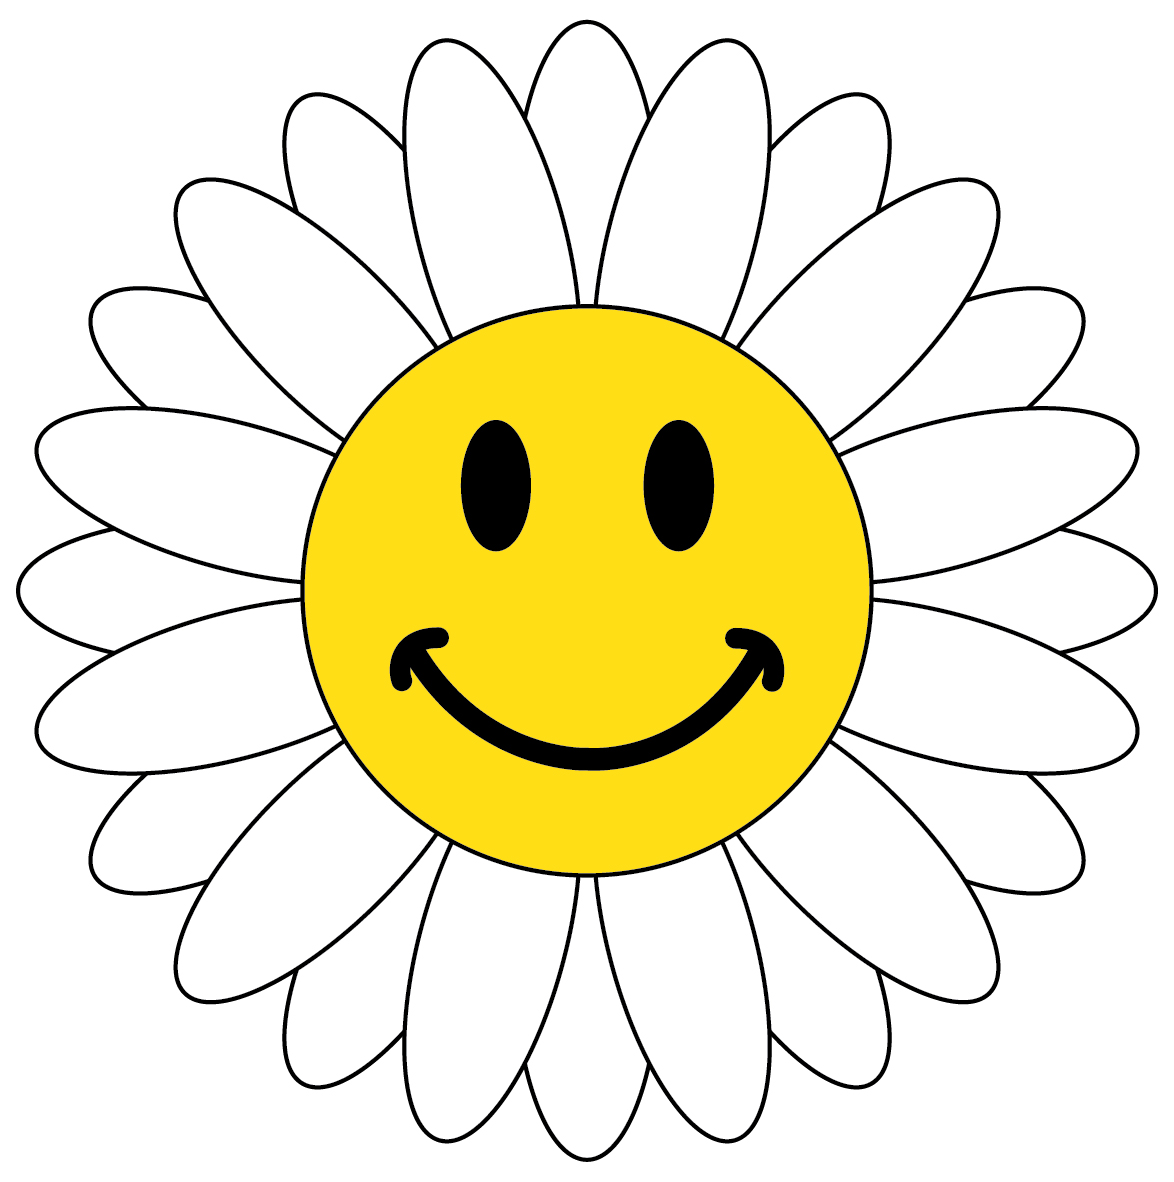 Smiley Face Thank You - ClipArt Best